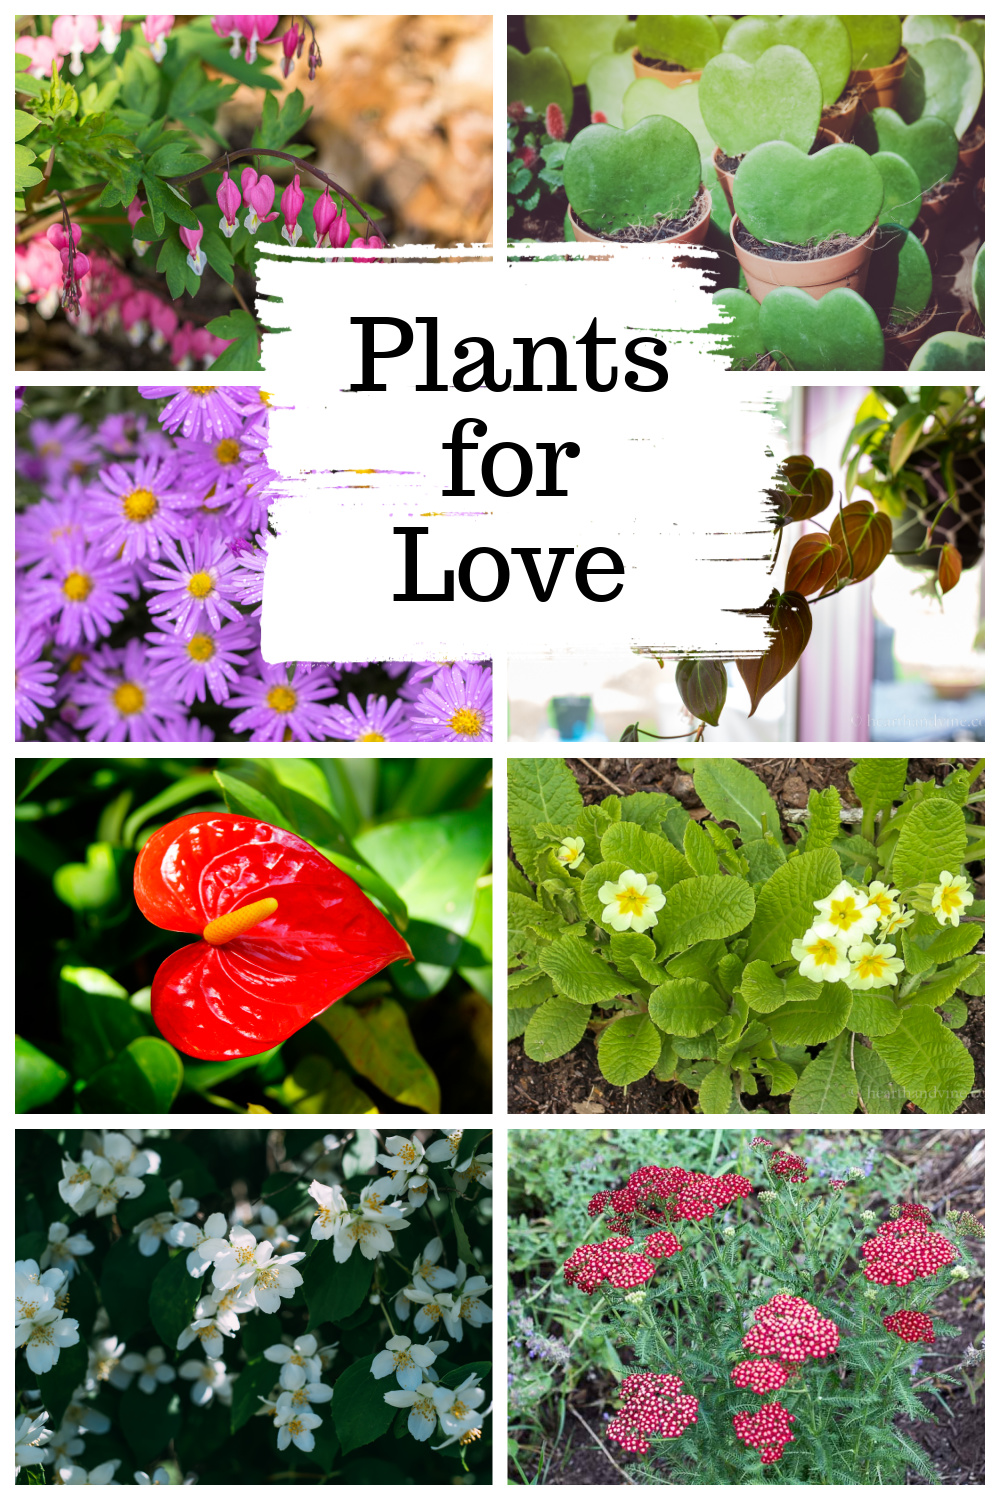 Gallery of plants for love including purple aster, philodendron micans, anthurium, primrose, jasmine flowers and yarrow.